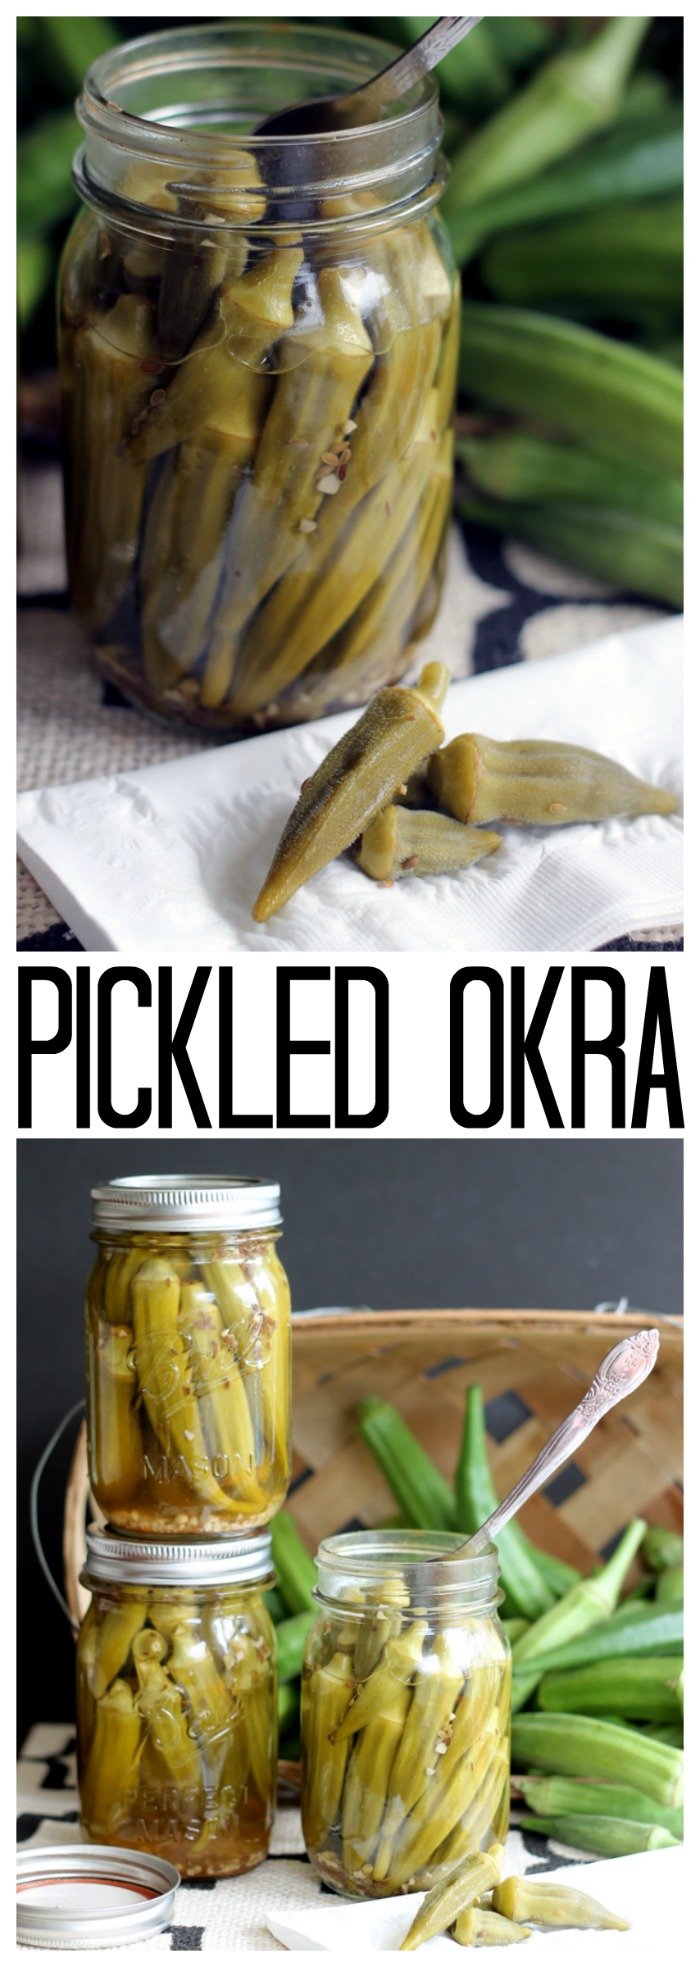 Delicious pickled okra is the perfect way to make use of summer produce